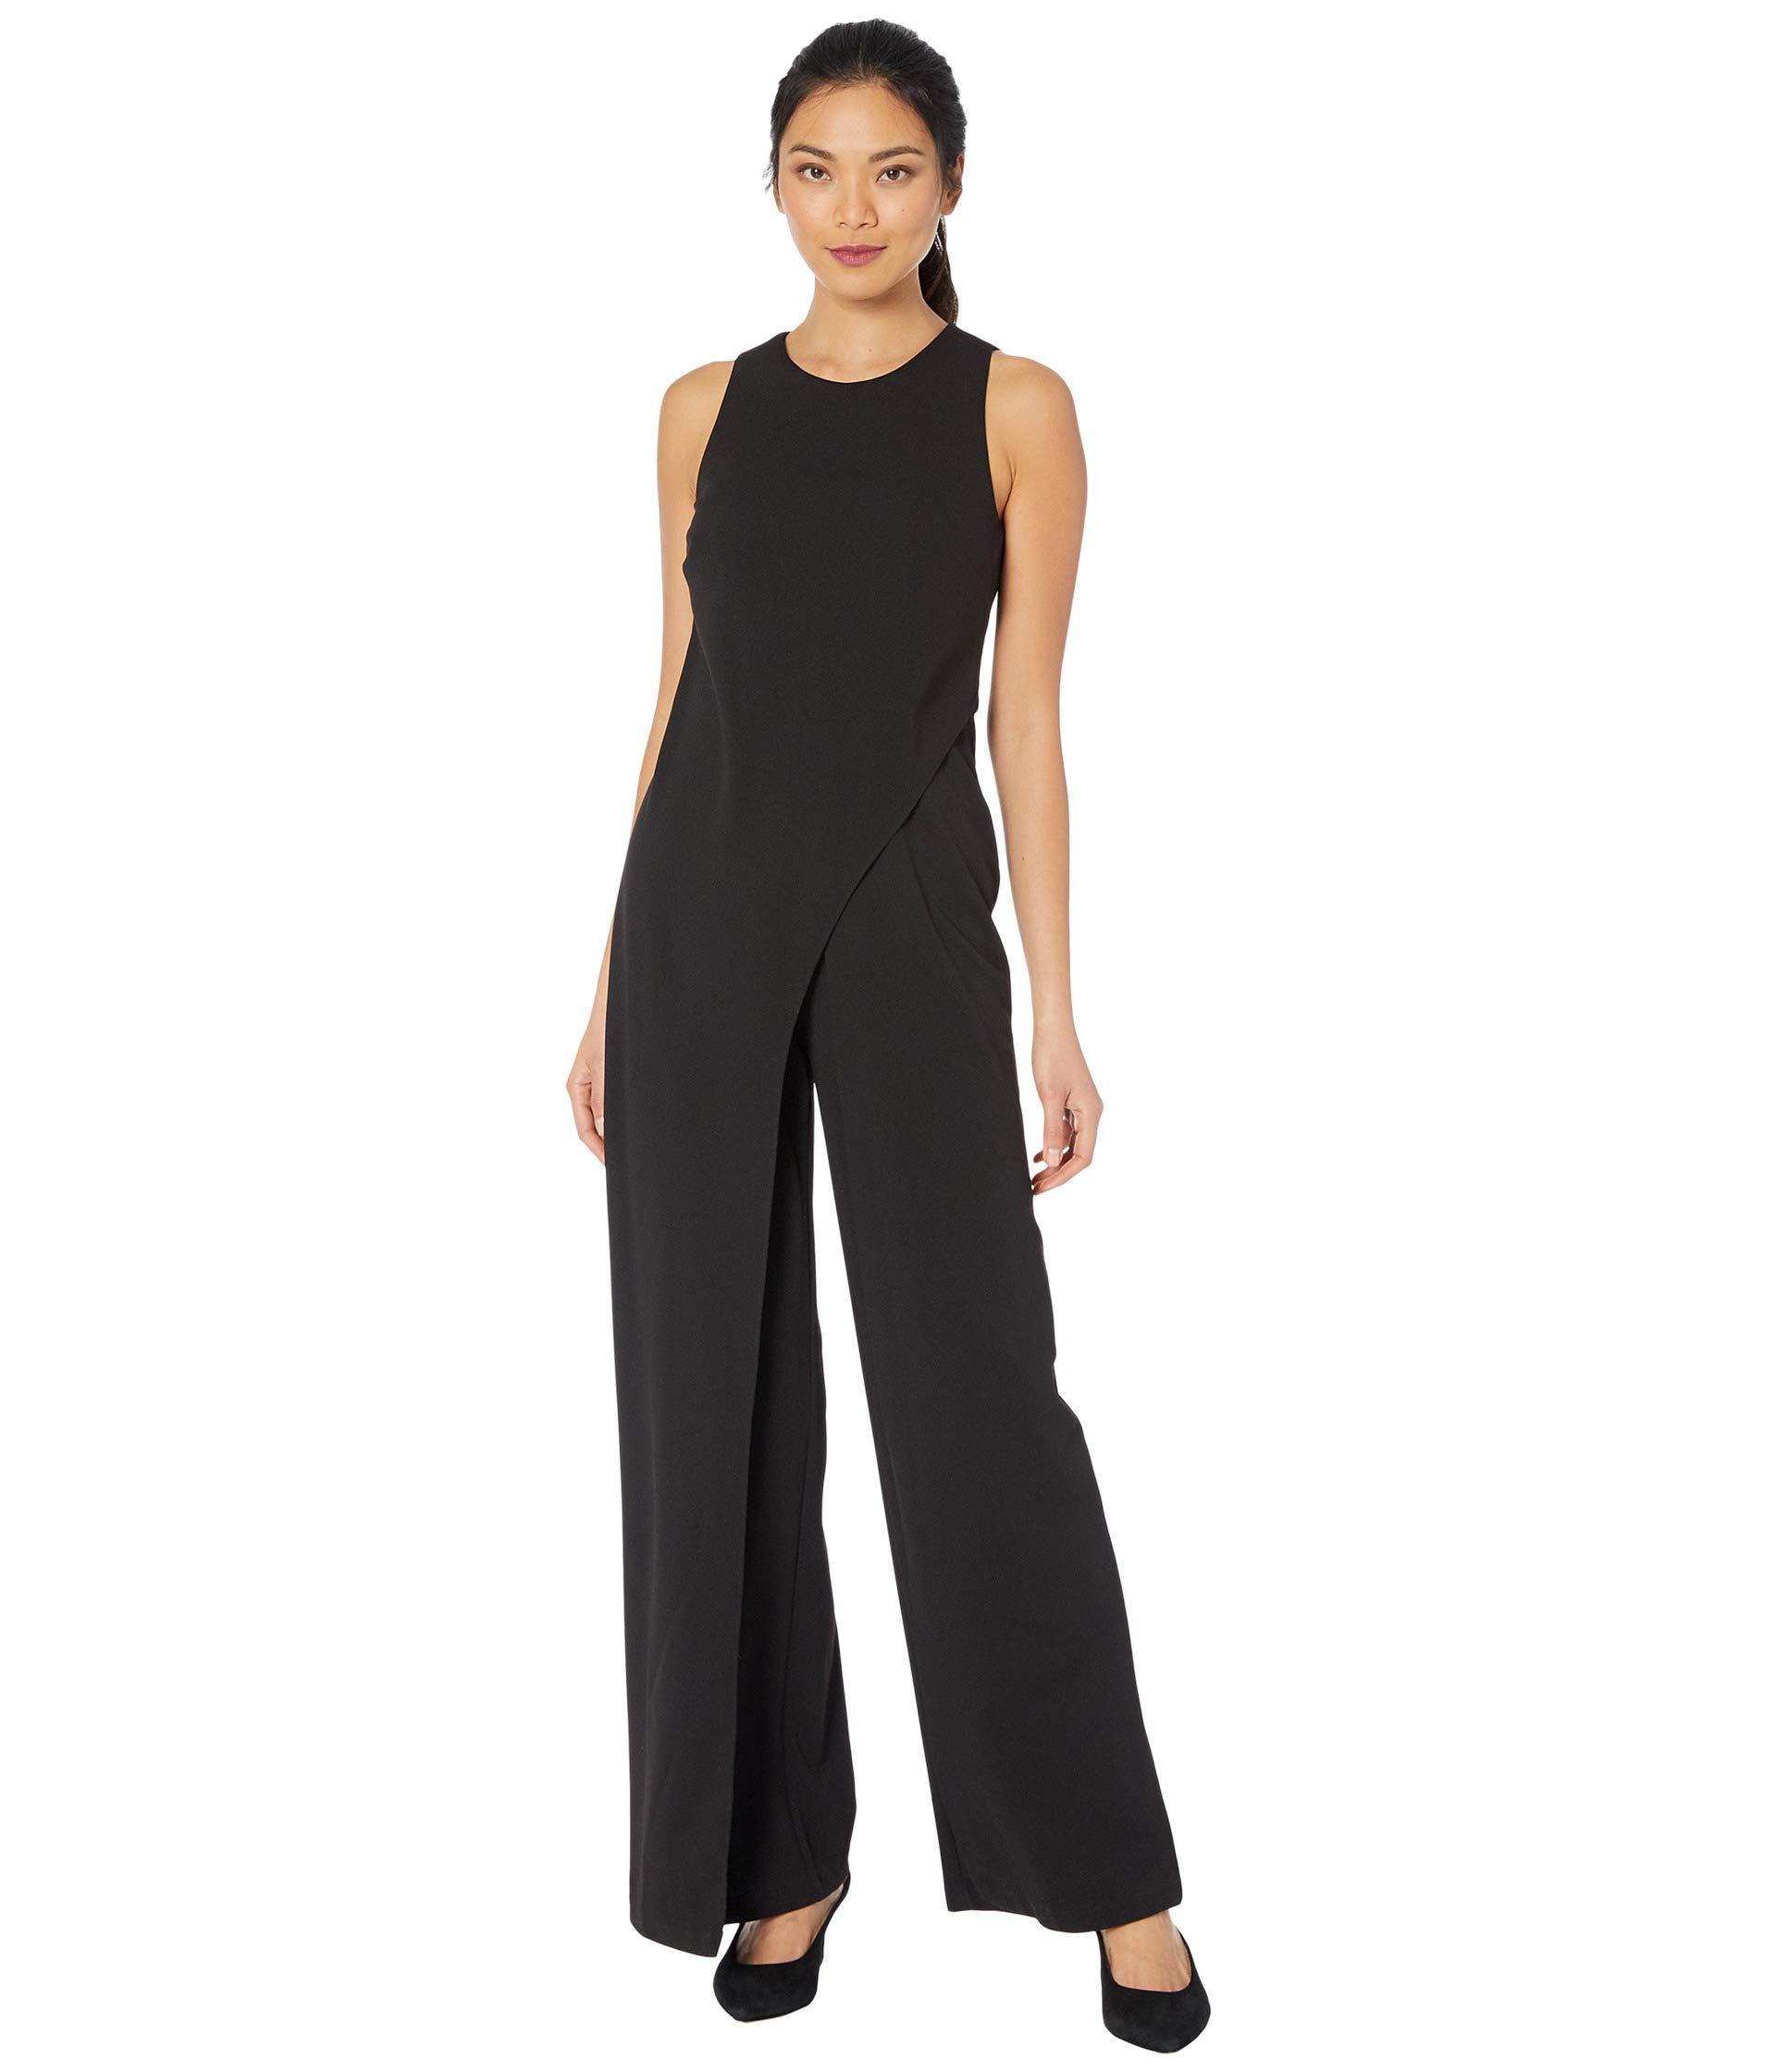 Adrianna Papell Crepe Halter Jumpsuit in Black - Save 54% - Lyst